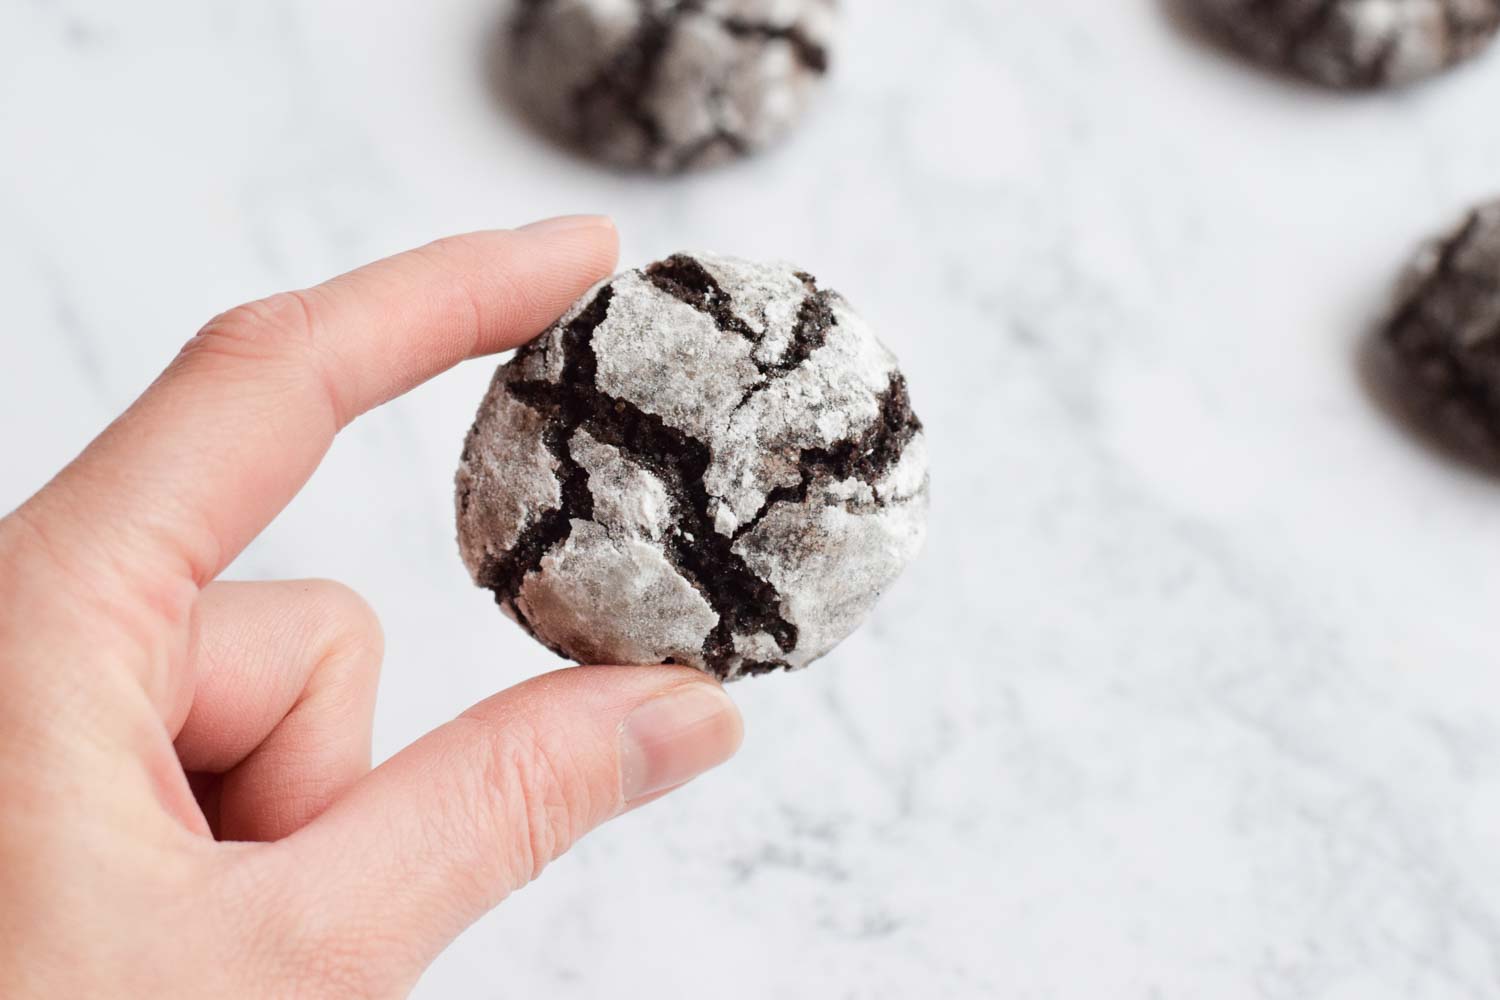 A hand holding a chocolate crinkle cookie